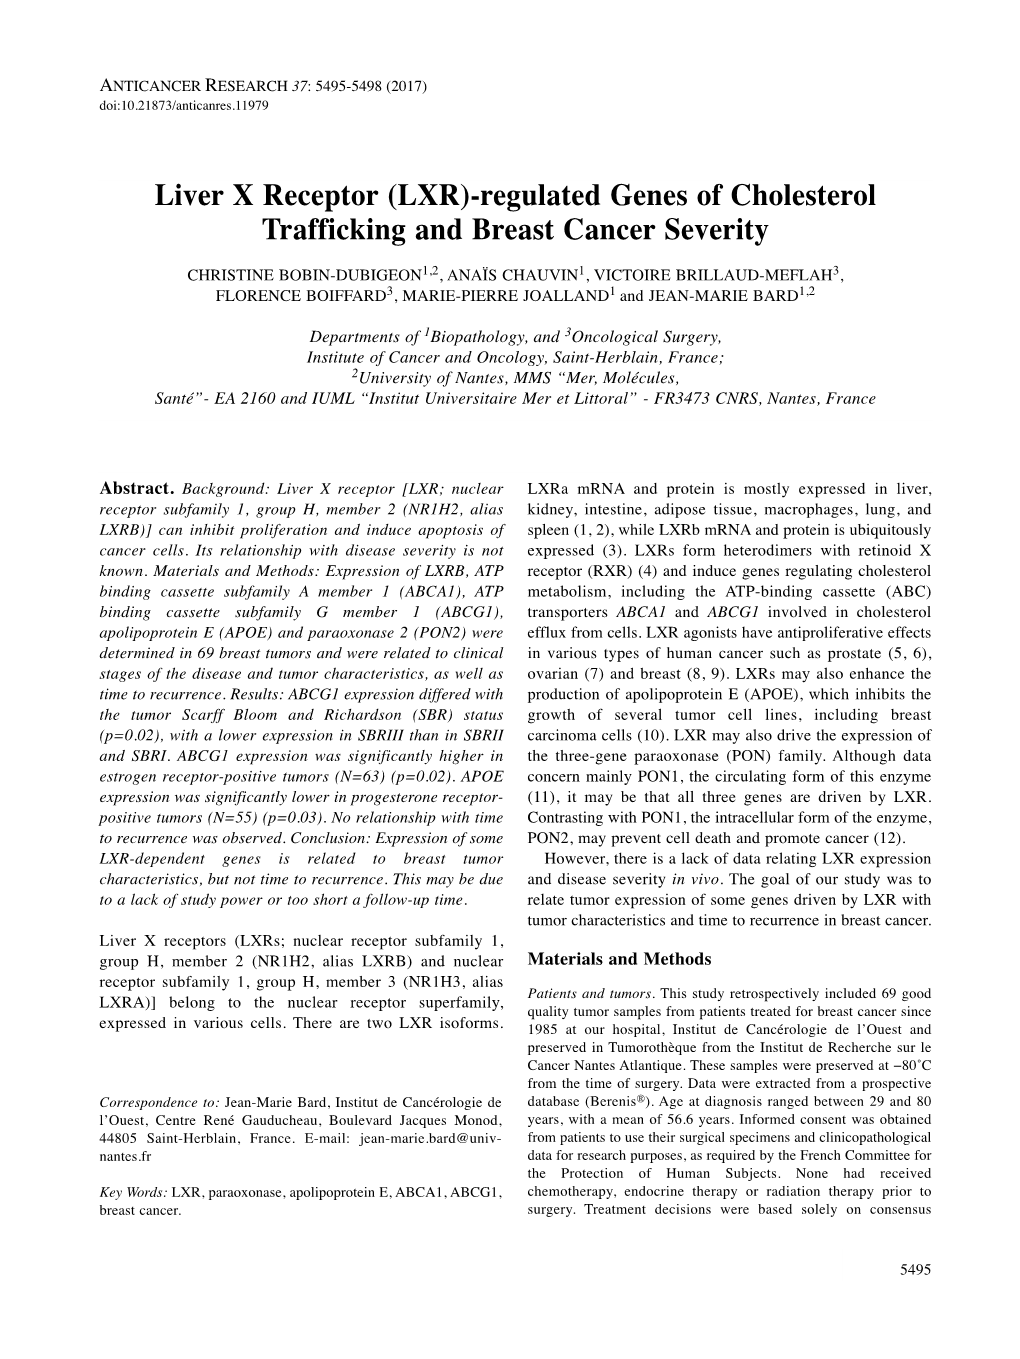 Liver X Receptor (LXR)-Regulated Genes of Cholesterol Trafficking and Breast Cancer Severity